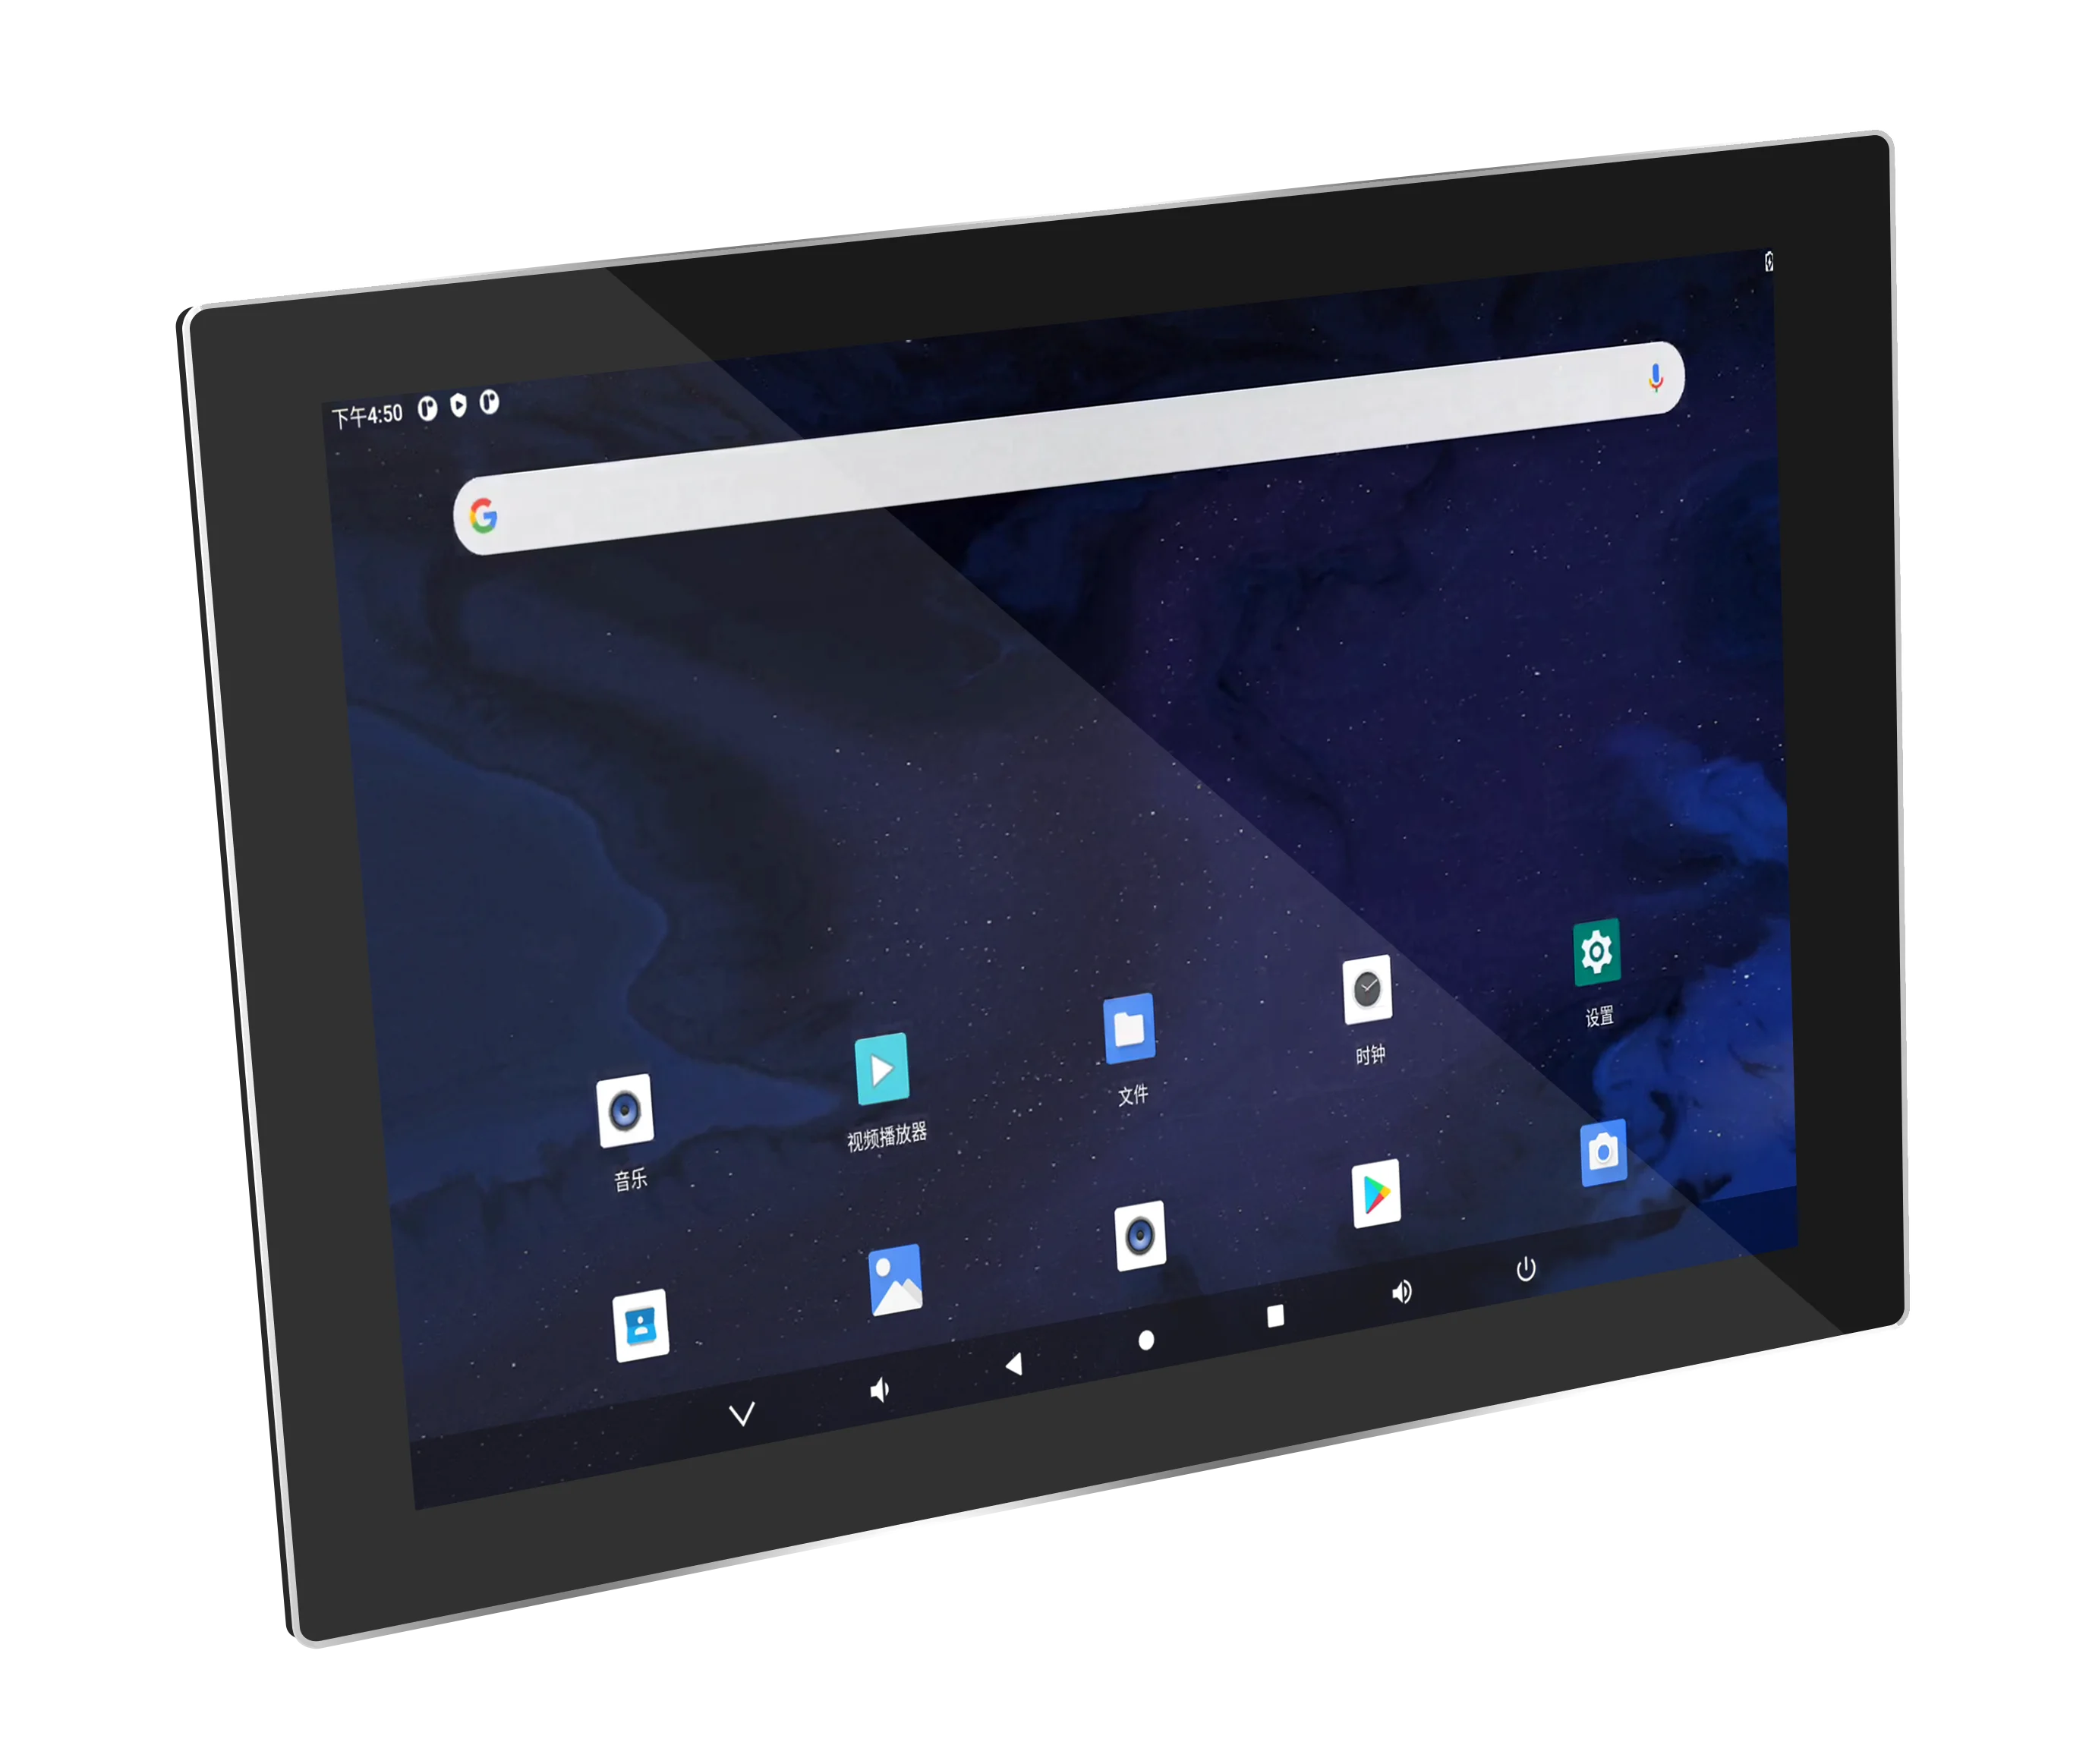 Premium android 12  industry touch panel PC all-in-one touch panel PC powered by RK3568 SoC features 4G 5G WIFI  remote manage